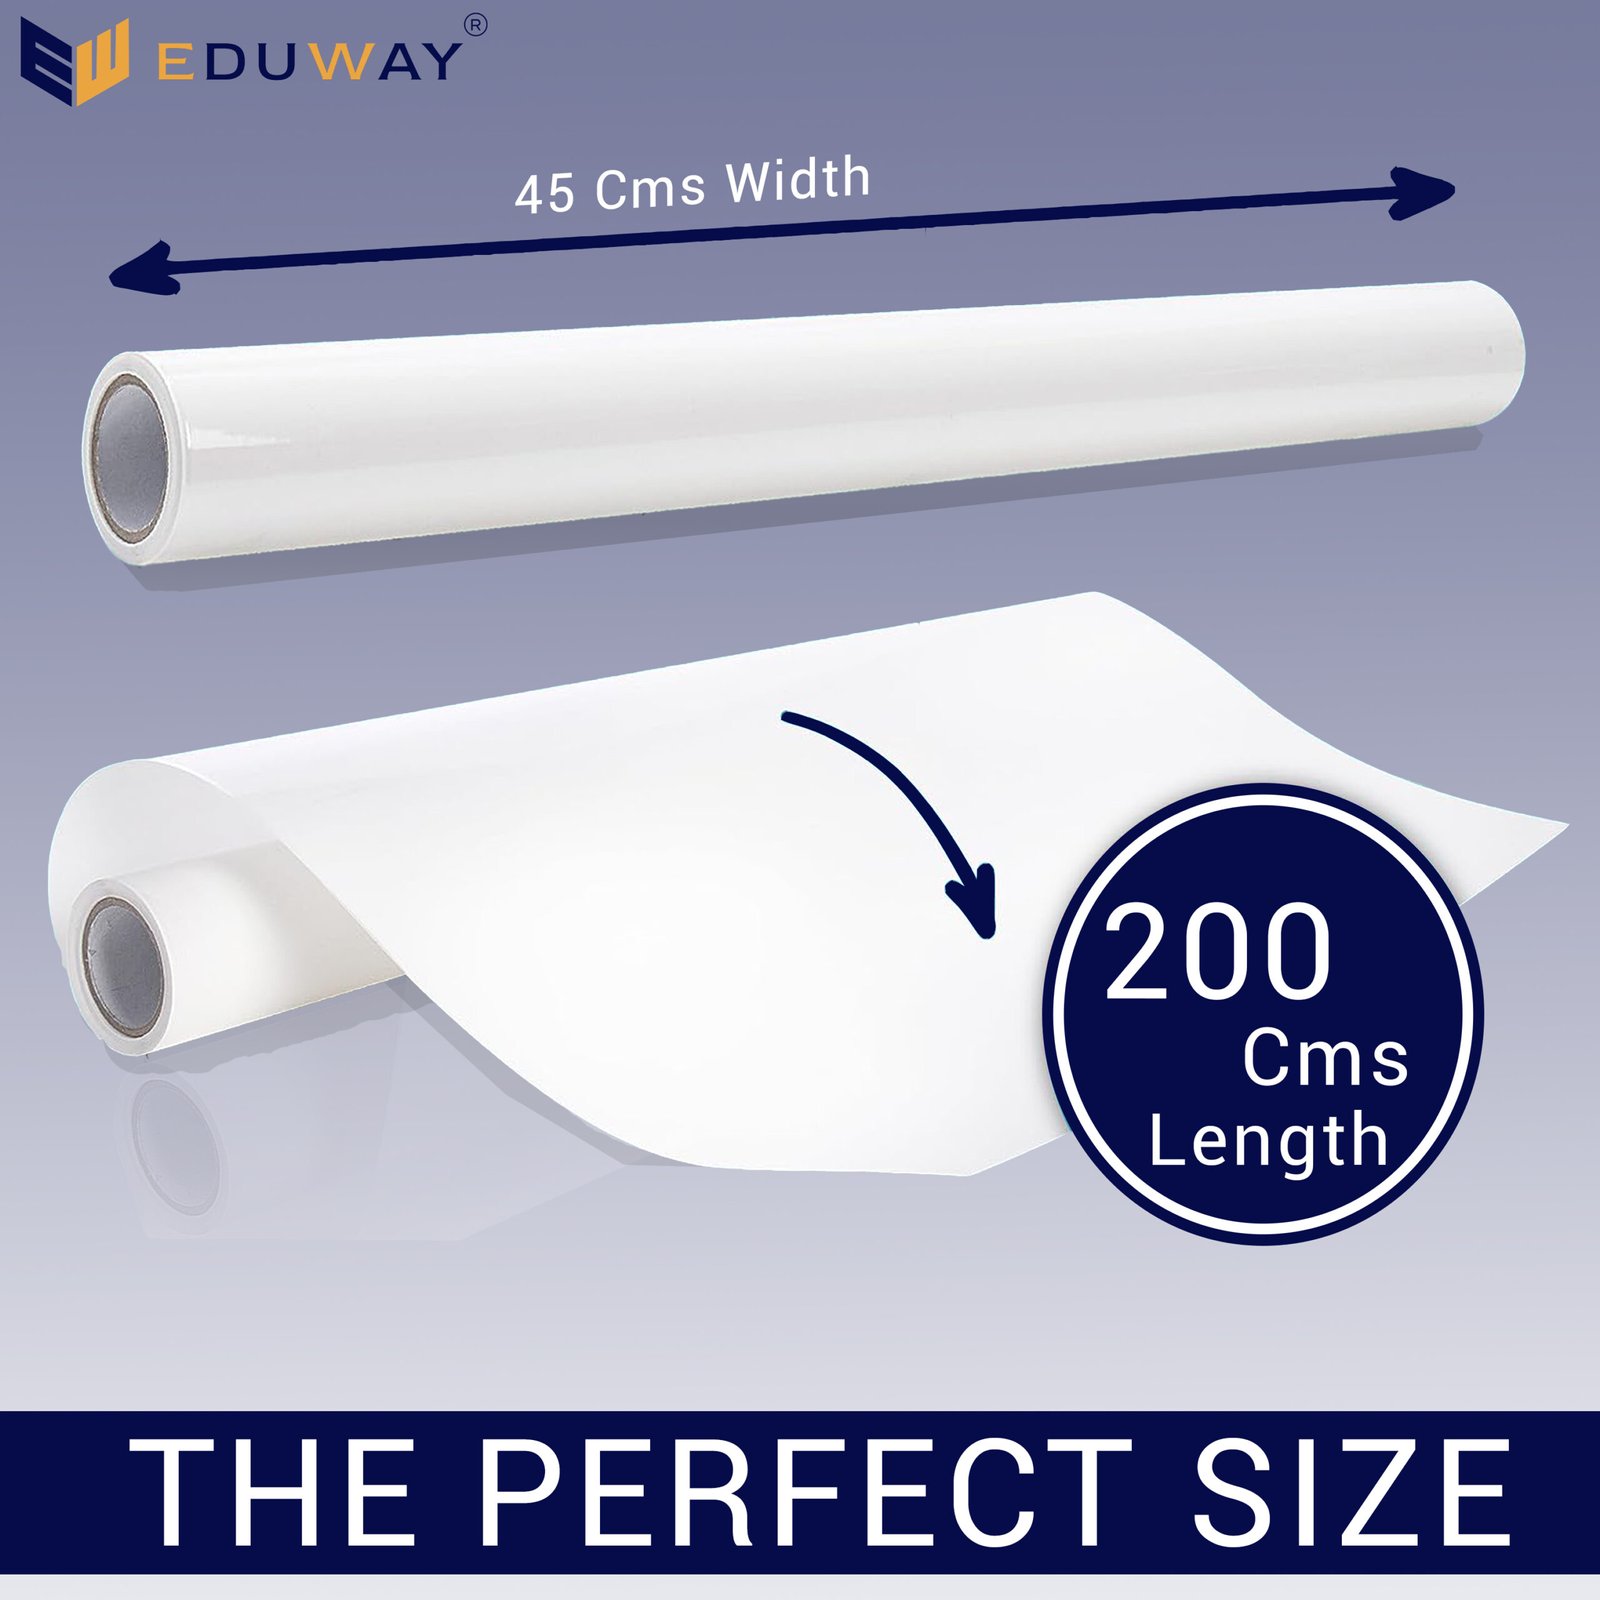 vinyl whiteboard sticker self adhesive 45x200 Cms with marker dimension